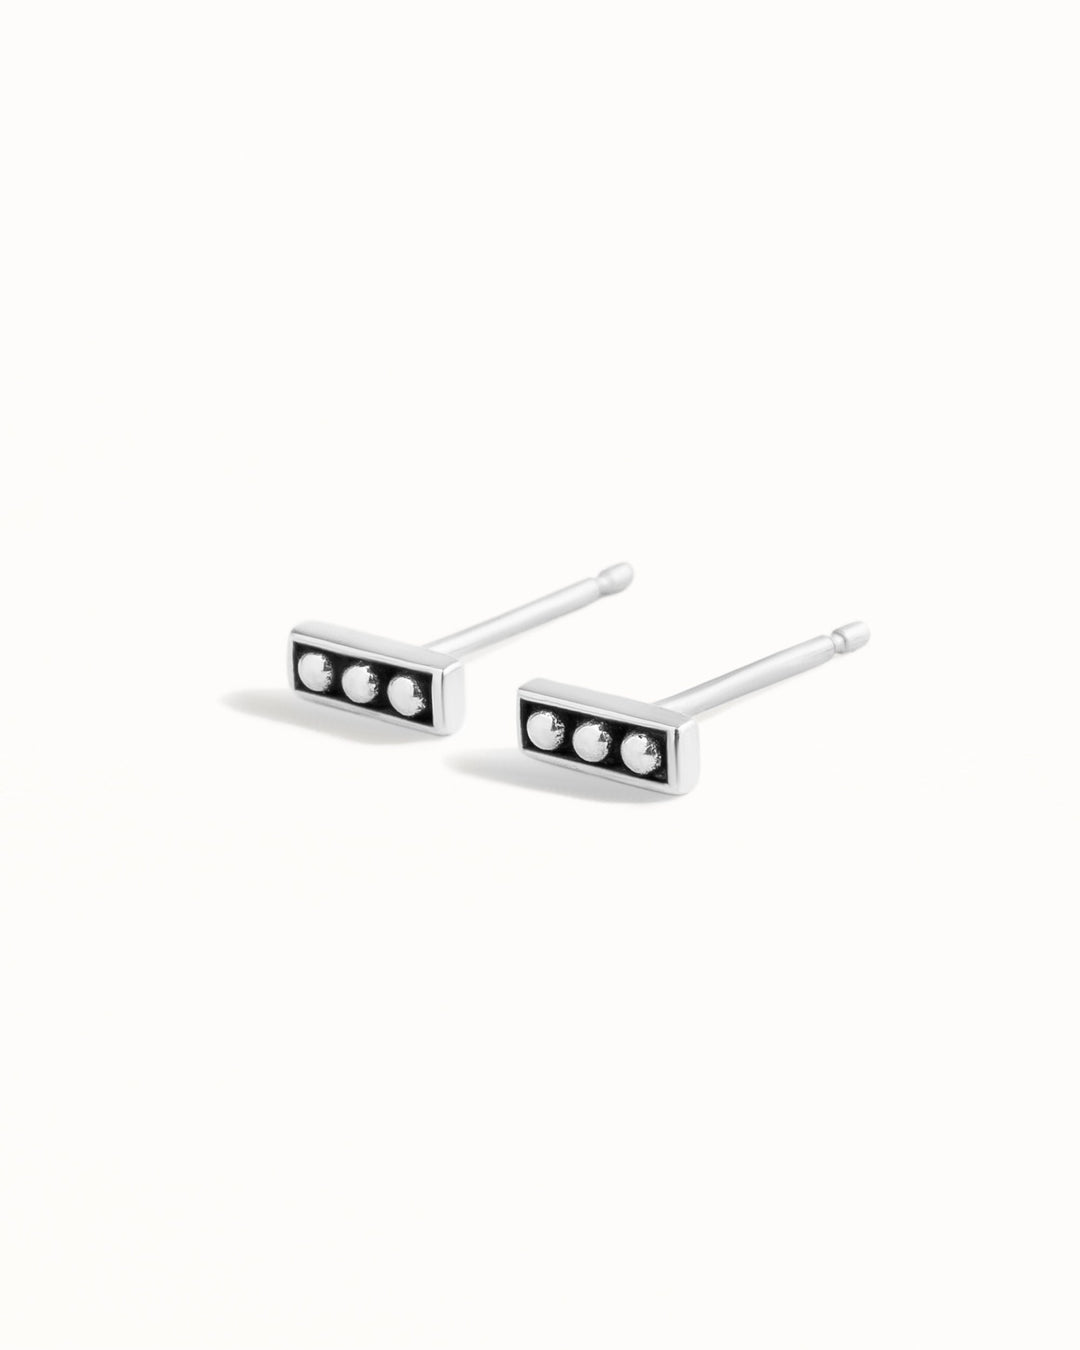 Silver Stud Earrings Sterling Silver Square Earrings Bohemian Jewelry  Gift for Her - CST003